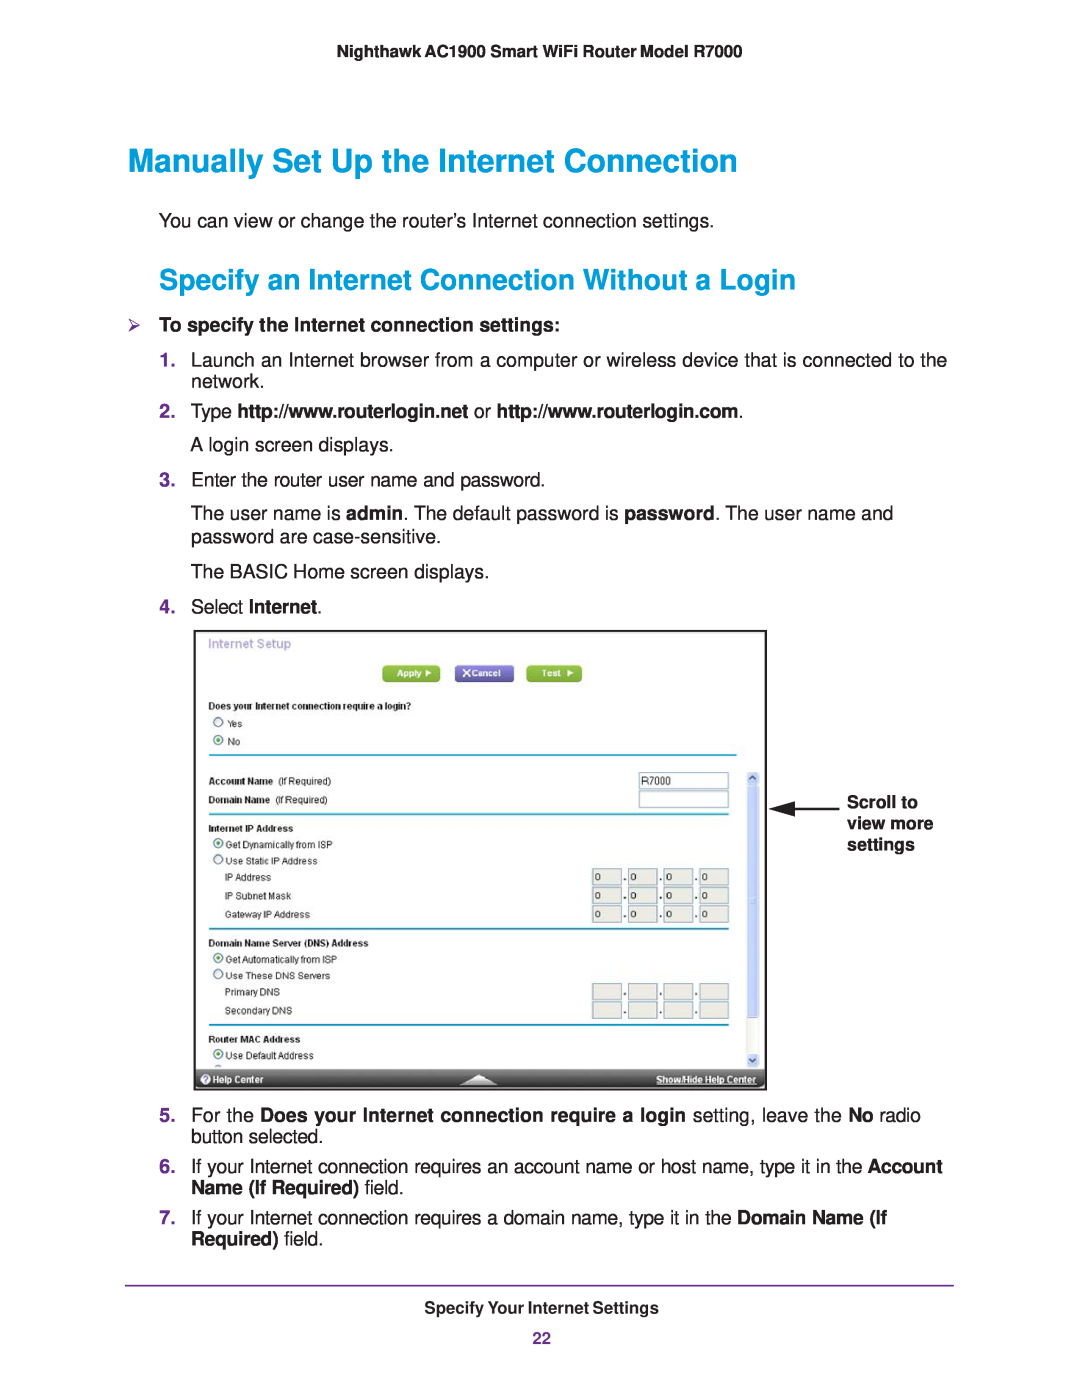 NETGEAR R7000 user manual Manually Set Up the Internet Connection, Specify an Internet Connection Without a Login 